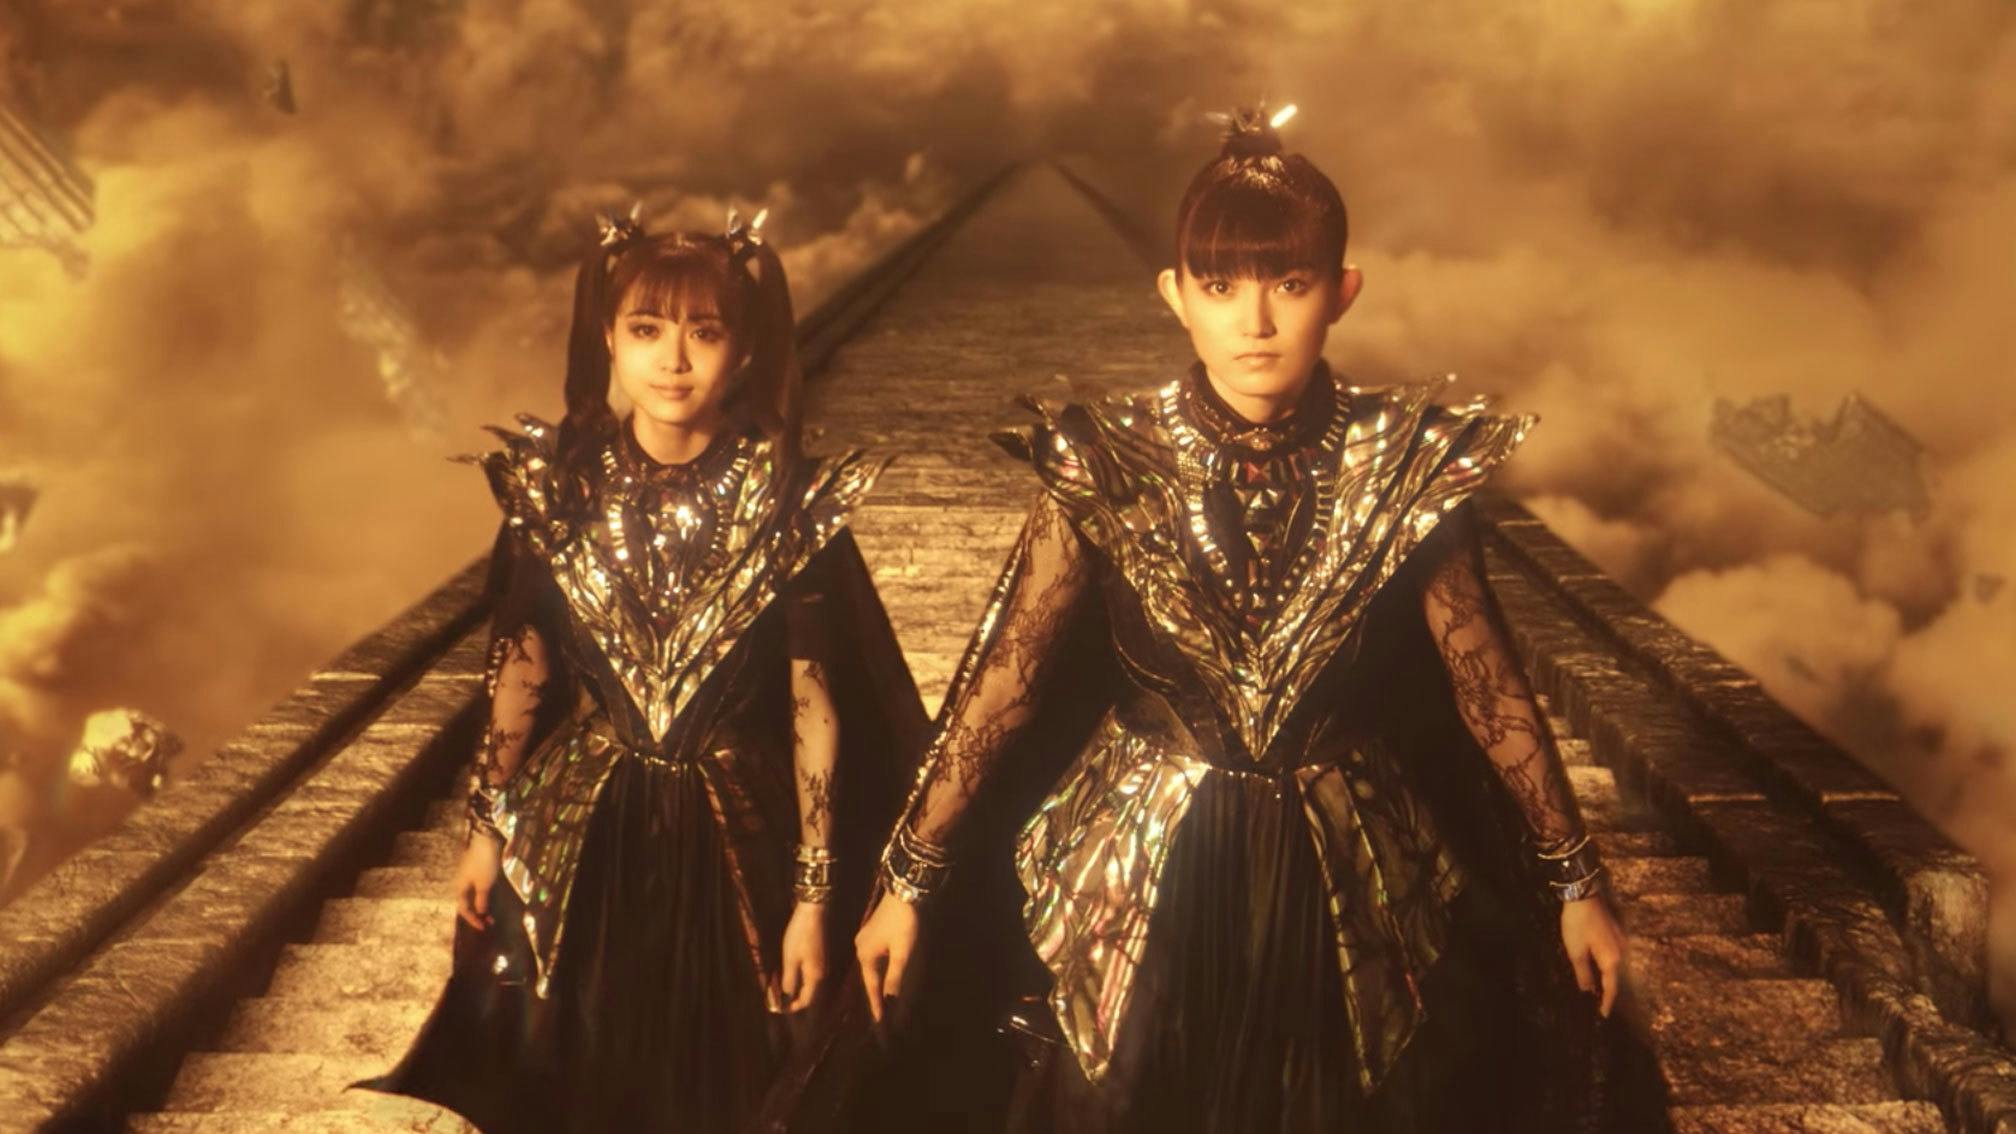 Watch BABYMETAL bring this chapter of the band to an end with STAIRWAY TO LIVING LEGEND video